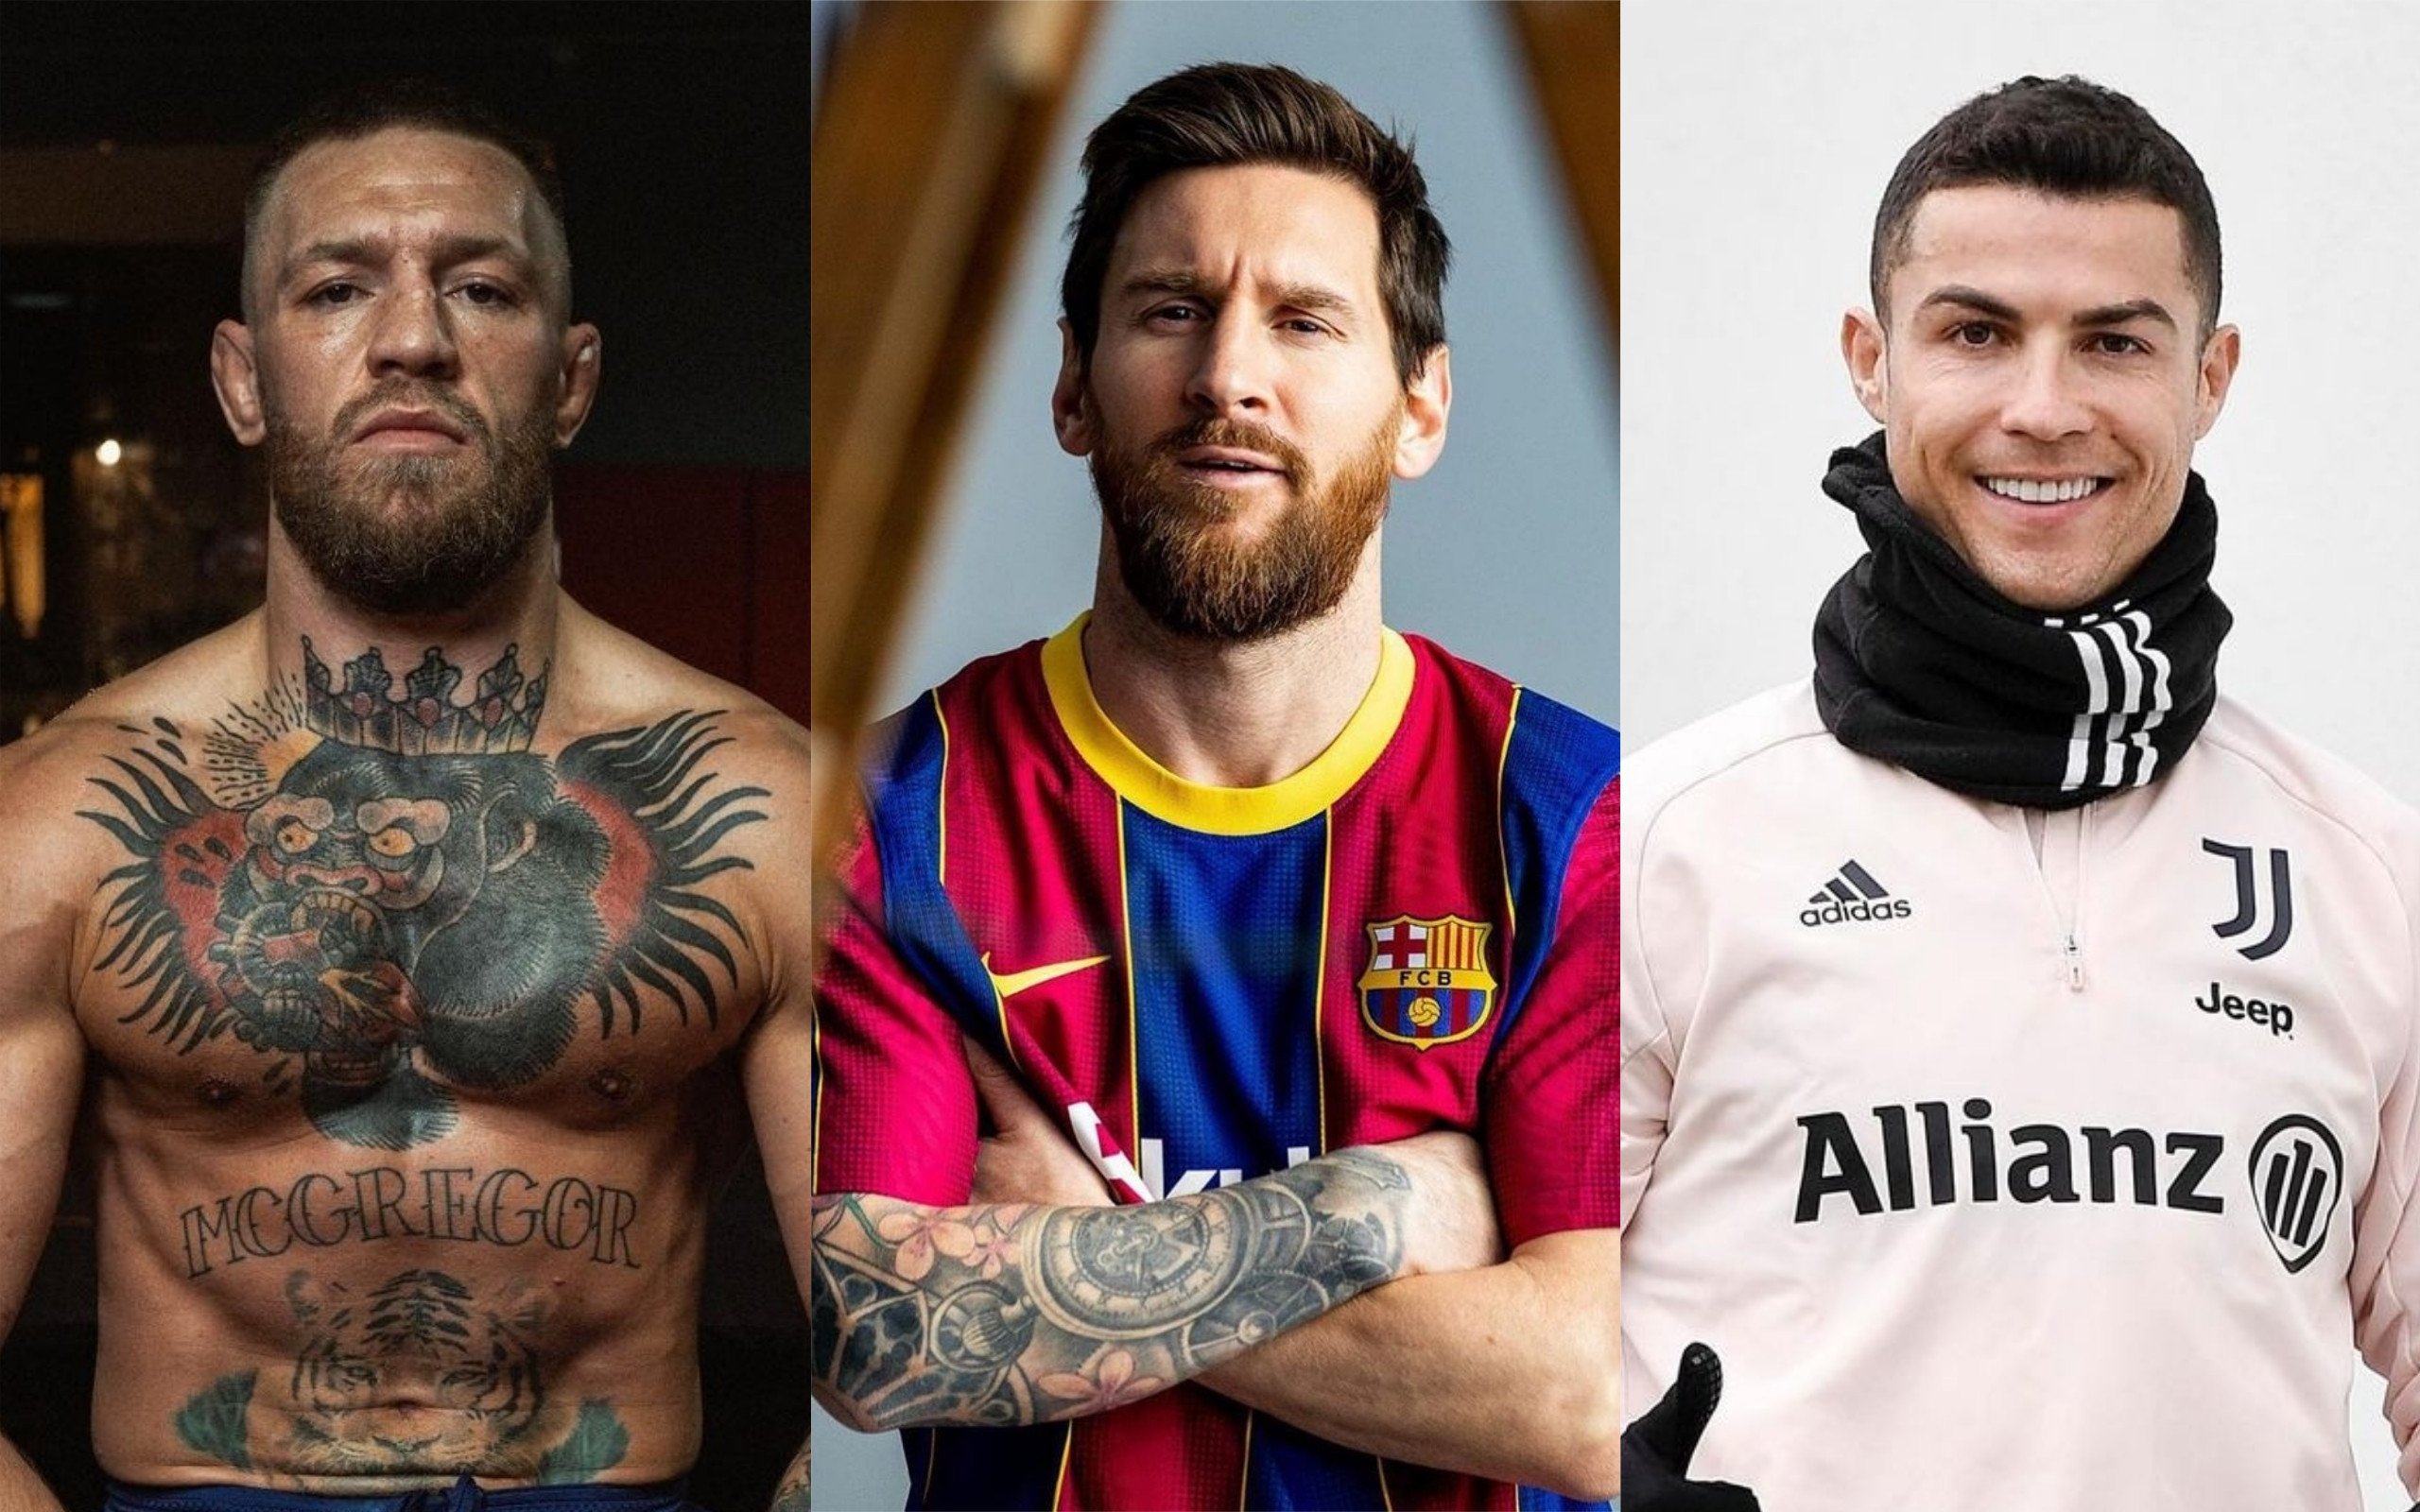 Conor McGregor, Lionel Messi and Cristiano Ronaldo all made more than US$100 million in the past 12 months, according to Forbes. Photos: @thenotoriousmma; @messi_messi10; @cristiano/ Instagram